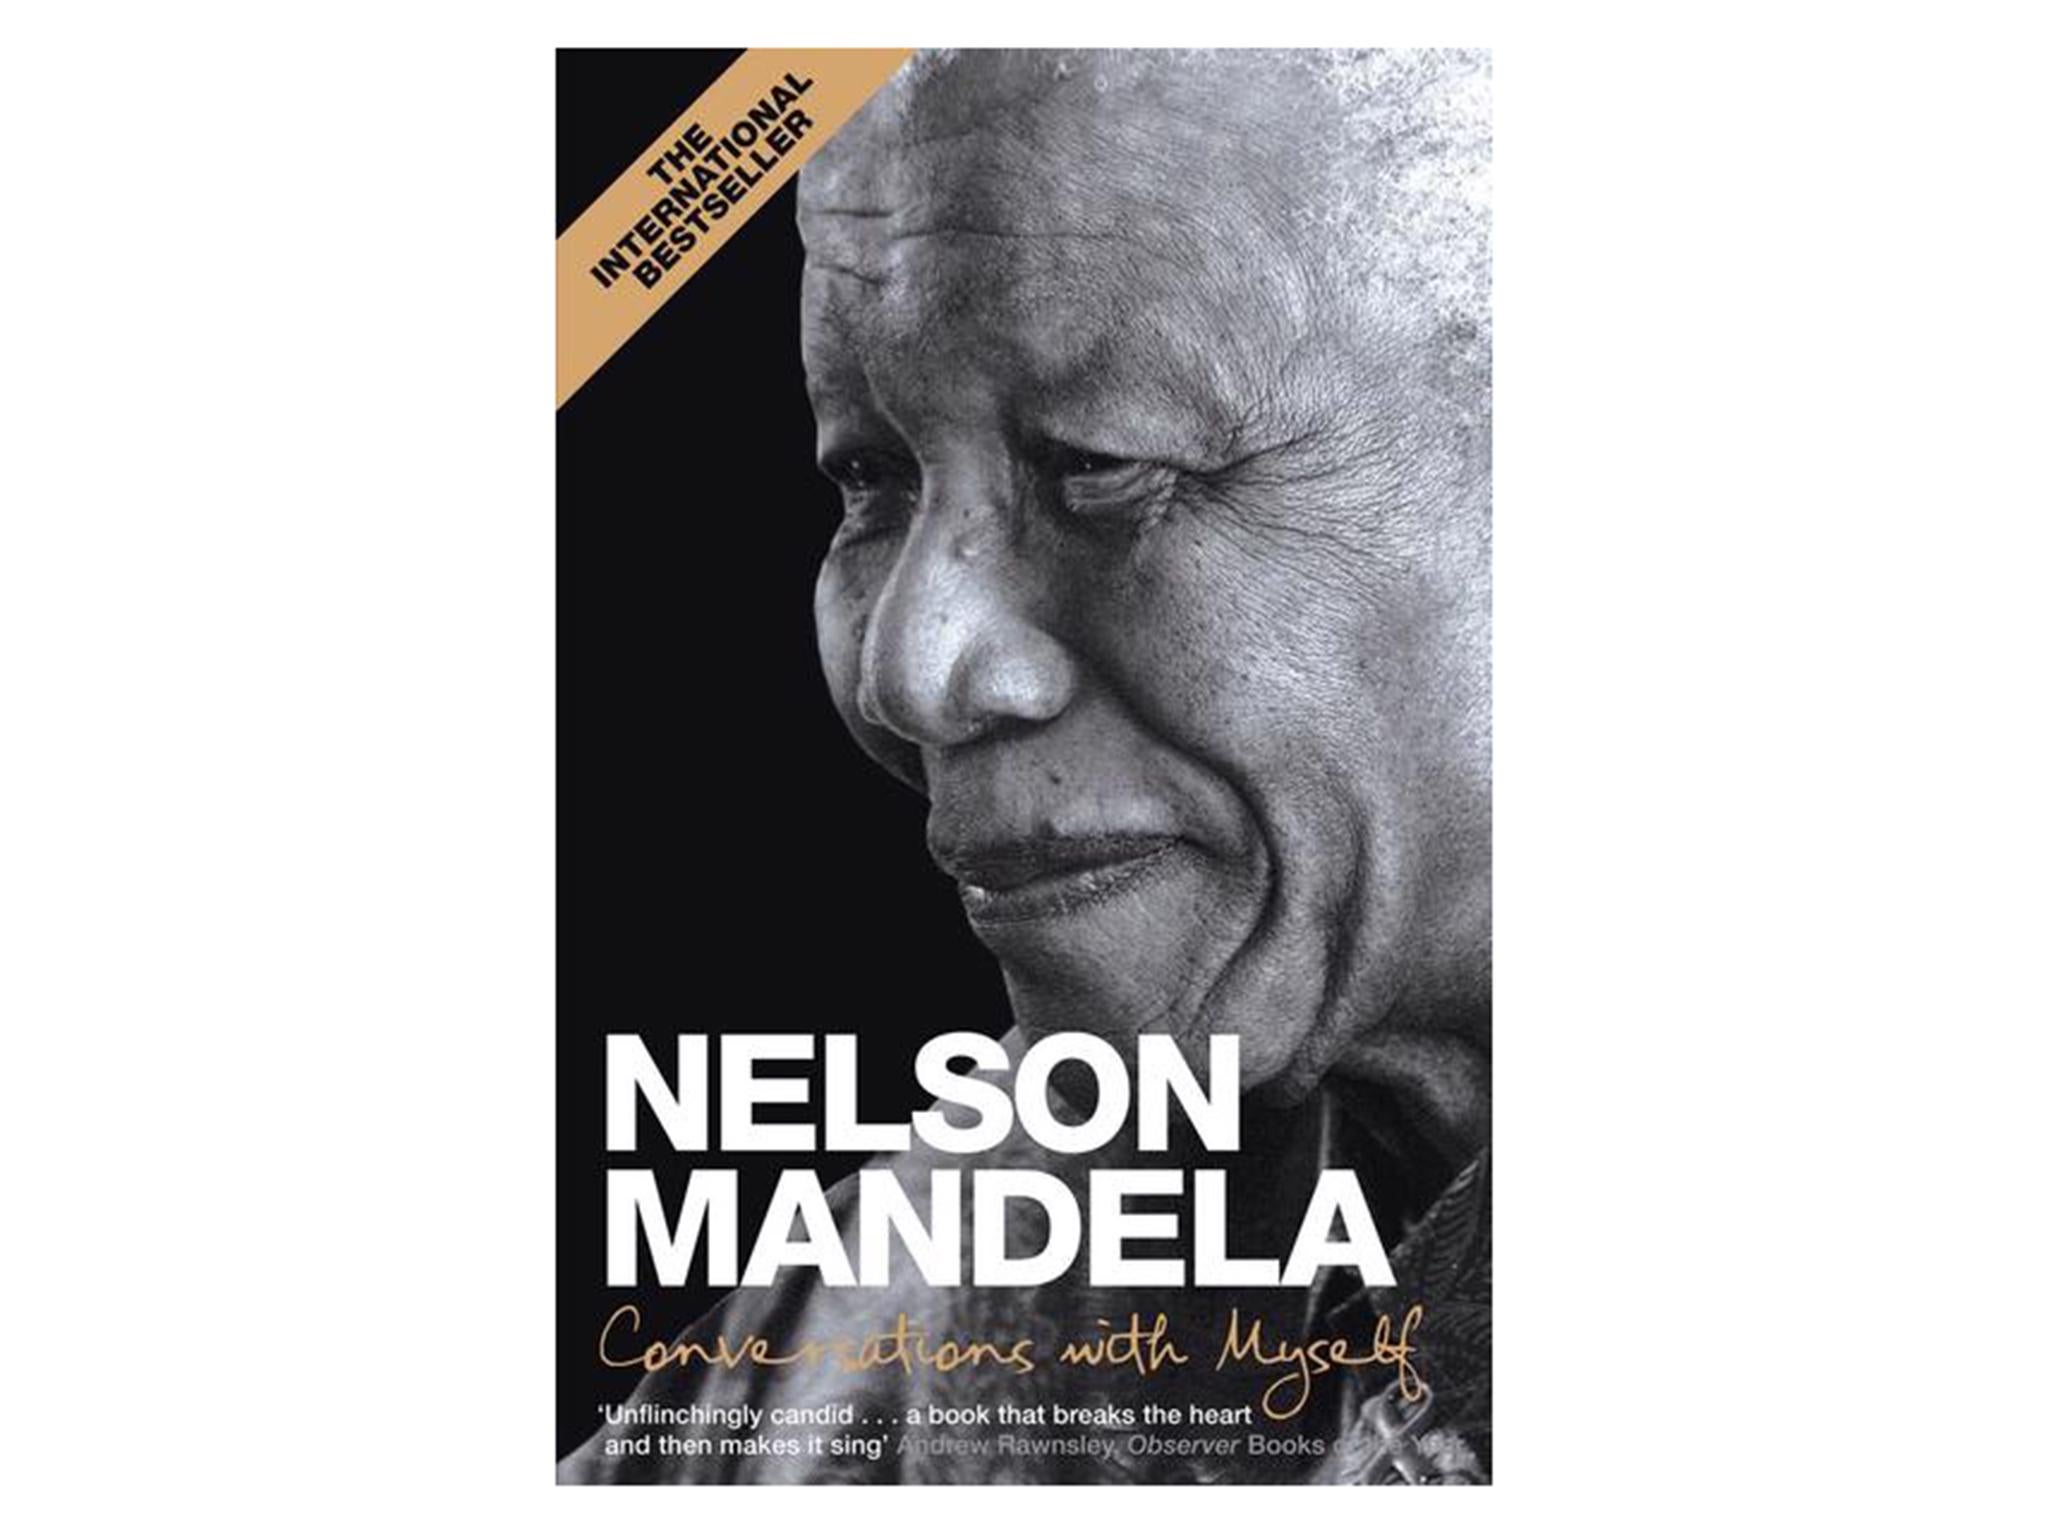 conversations-with-myself-by-nelson-mandela-published-by-pan-macmillan-indybest-.jpg